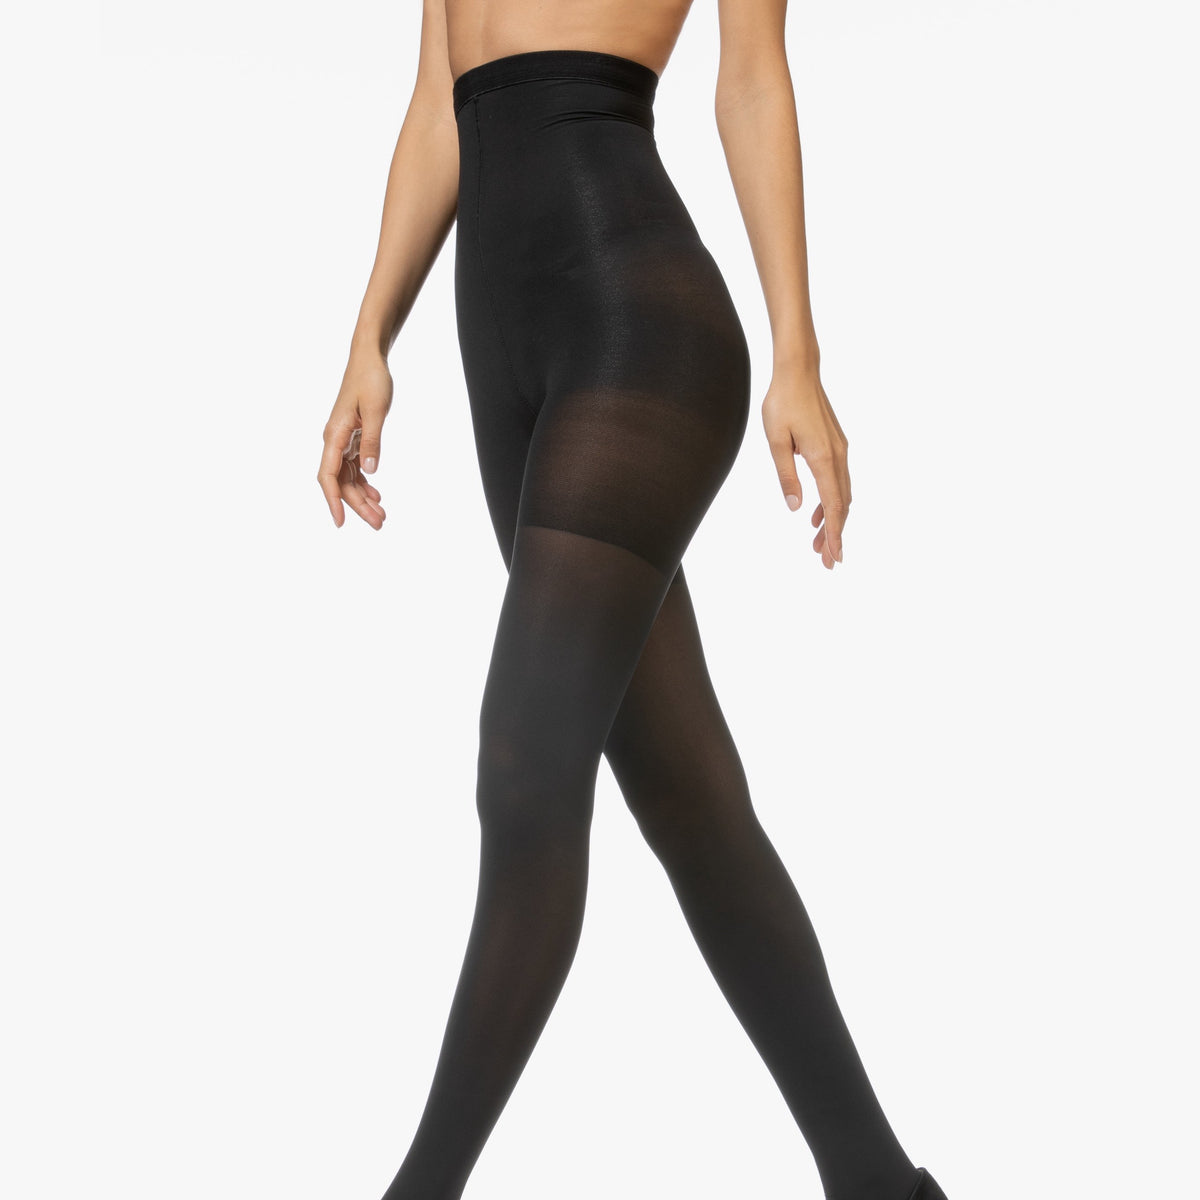 Spanx High Waist Invisible Luxe Leg Sheer Tights